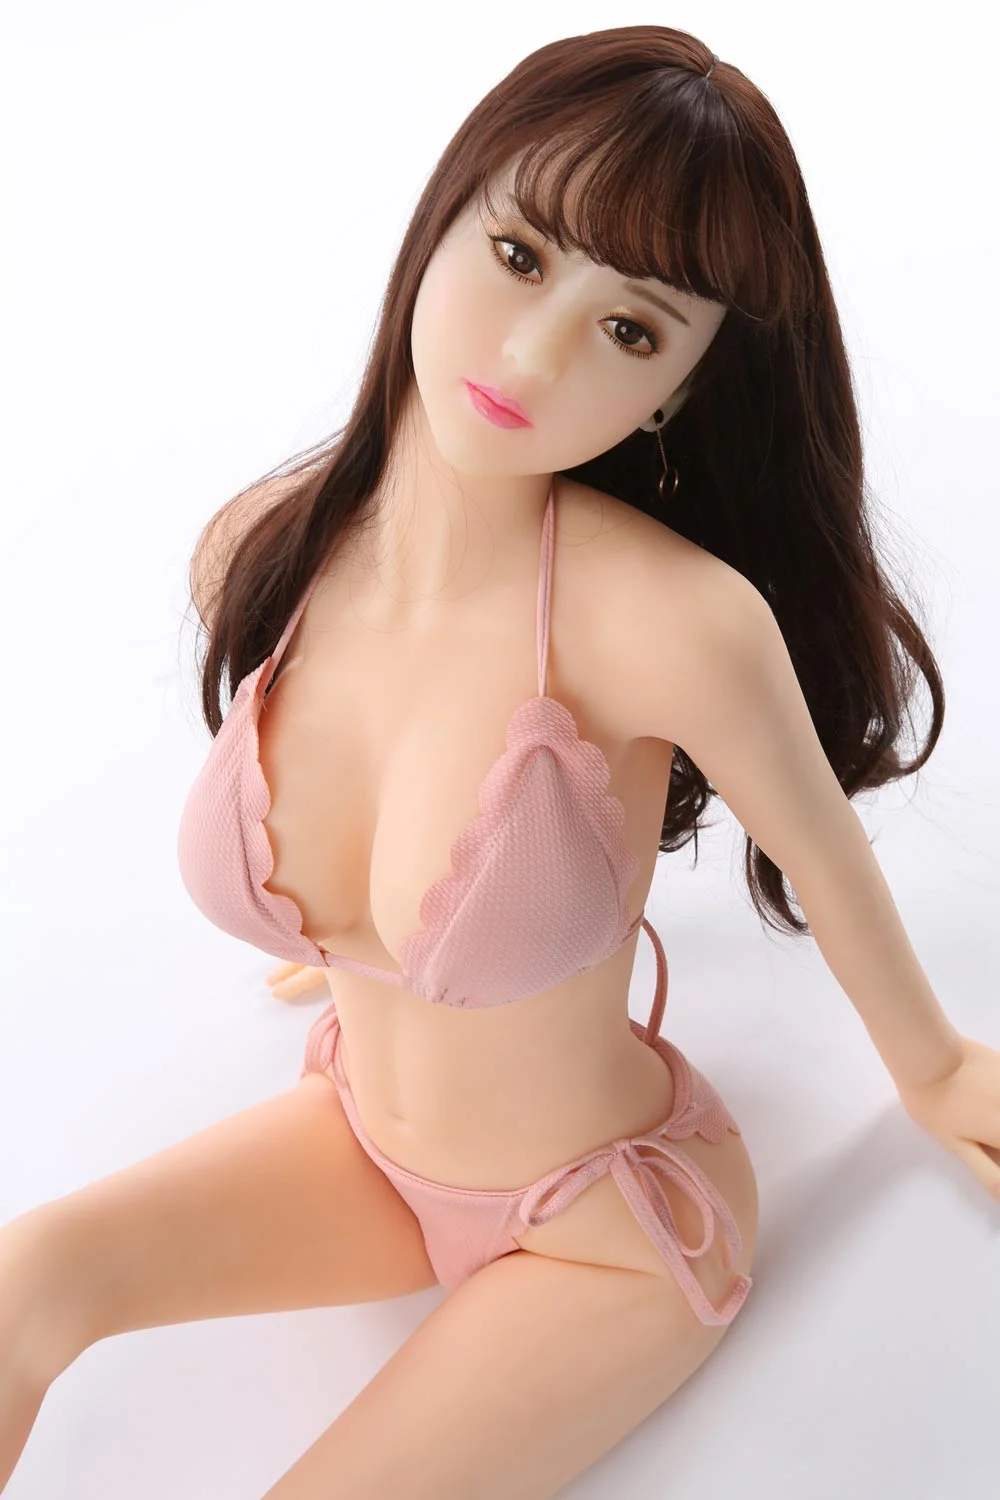 Mini sex doll with pink lips